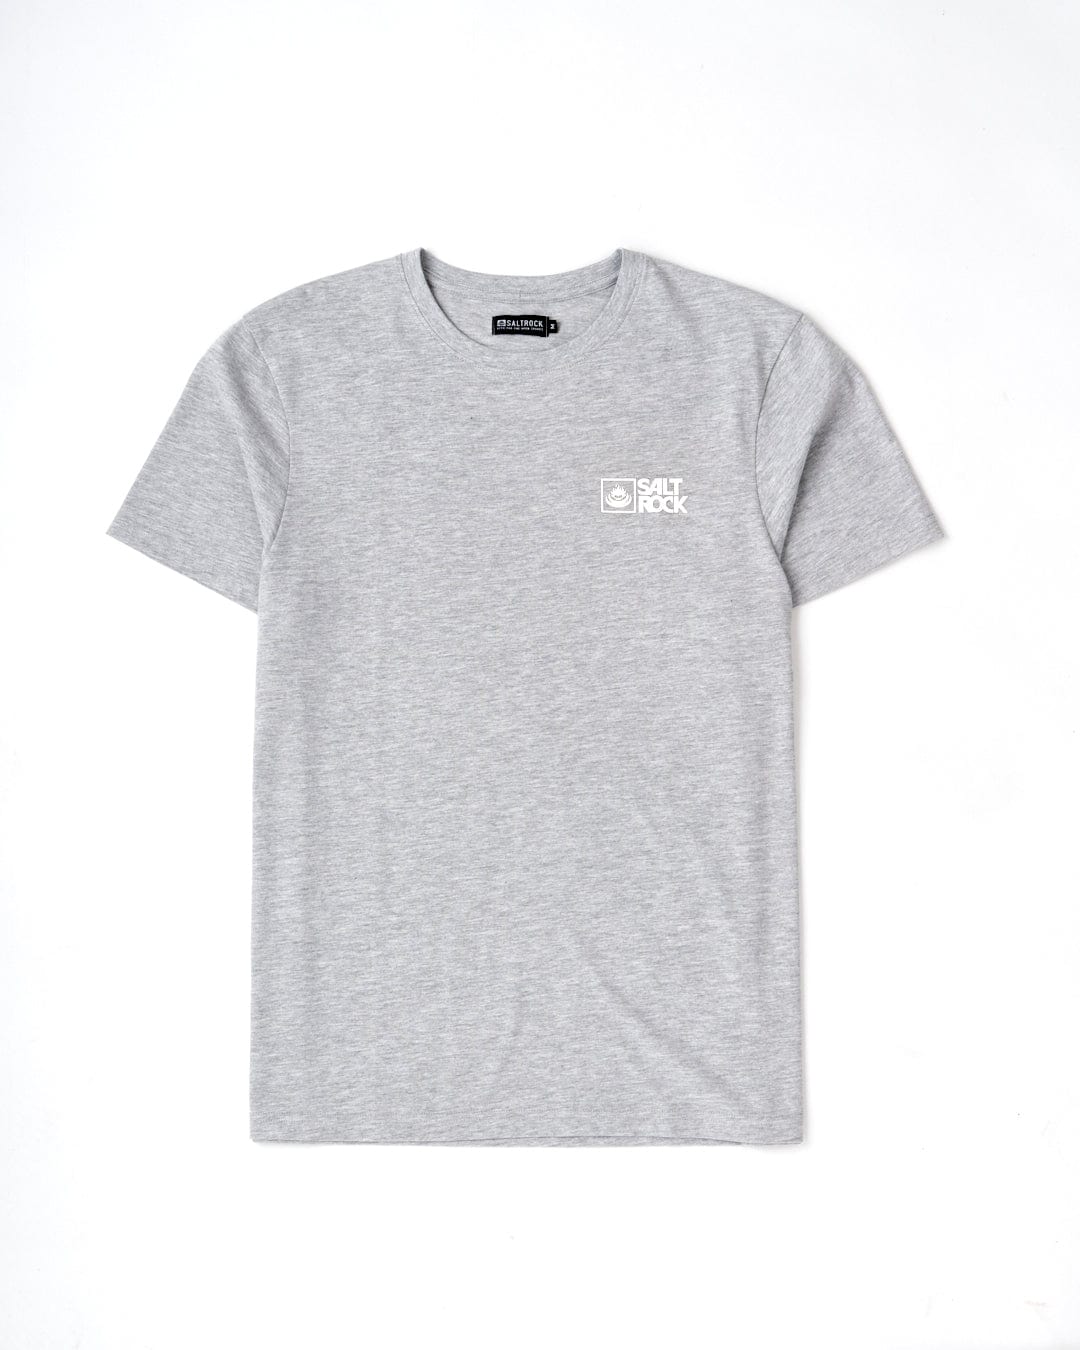 A soft, plain gray Saltrock Original mens short sleeve t-shirt with a small Saltrock branding logo on the left chest area, displayed against a white background.